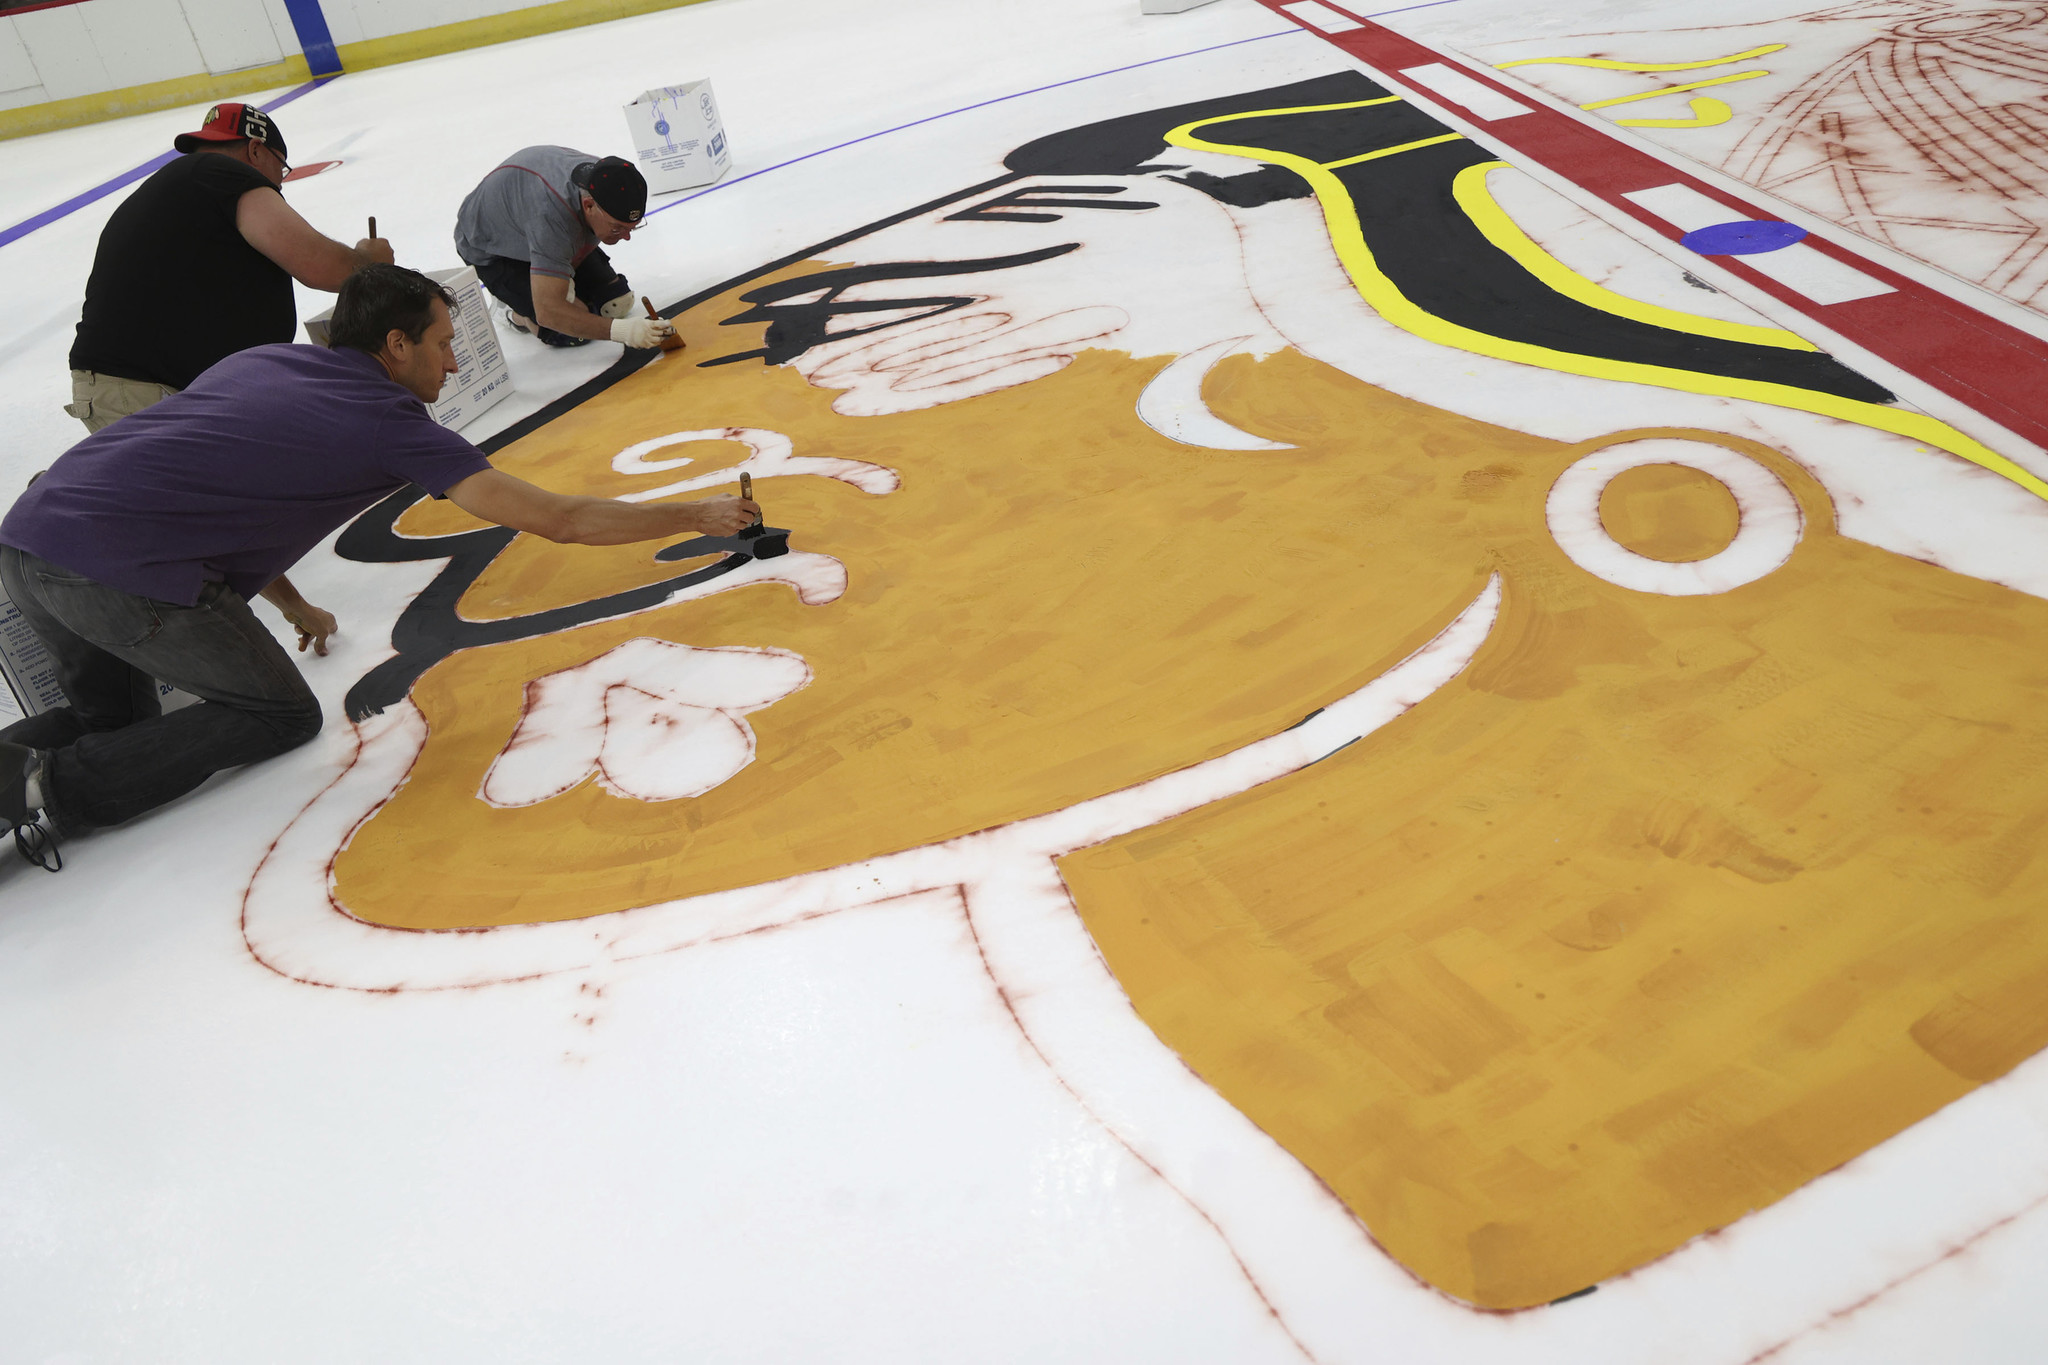 2022-23 Paint The Ice